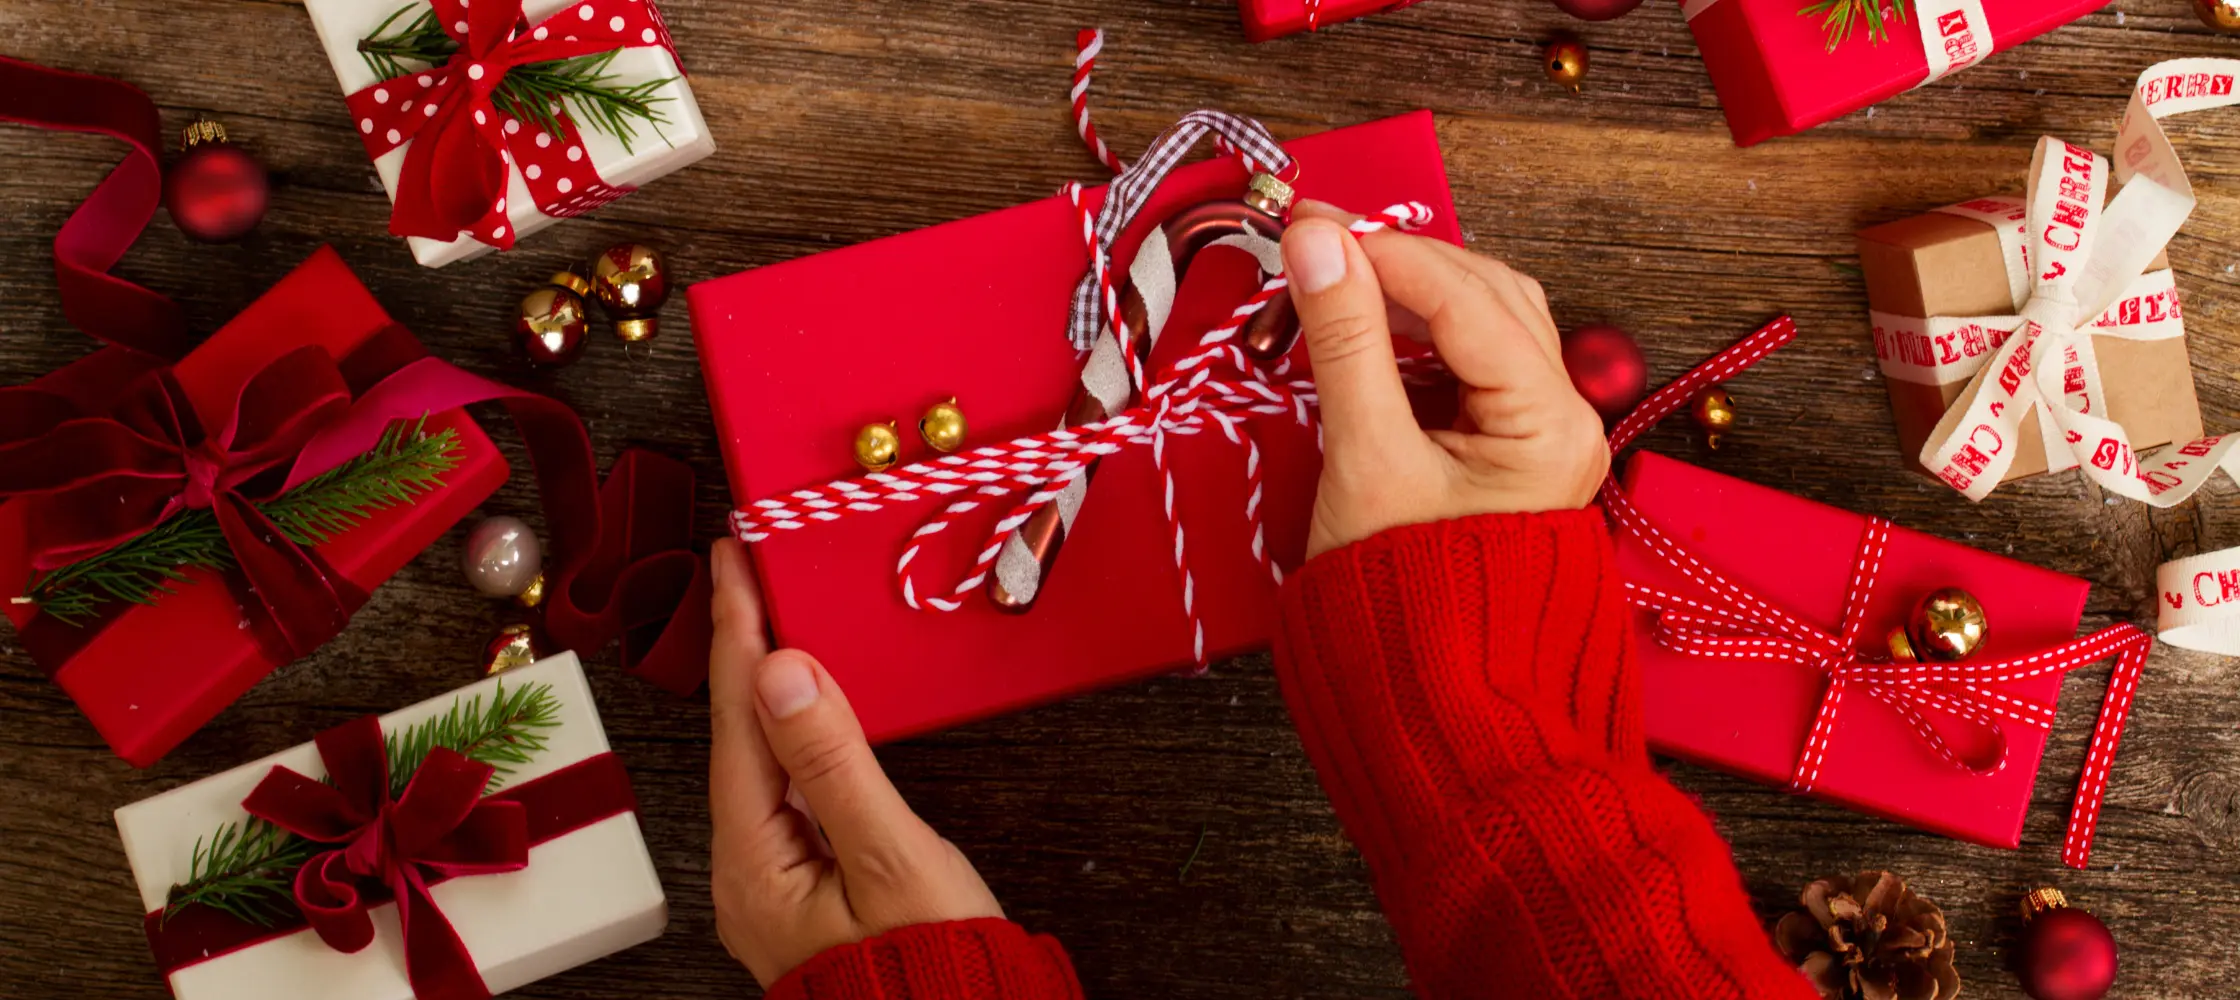 Budget-Friendly Christmas Gift Ideas to Spread Holiday Cheer